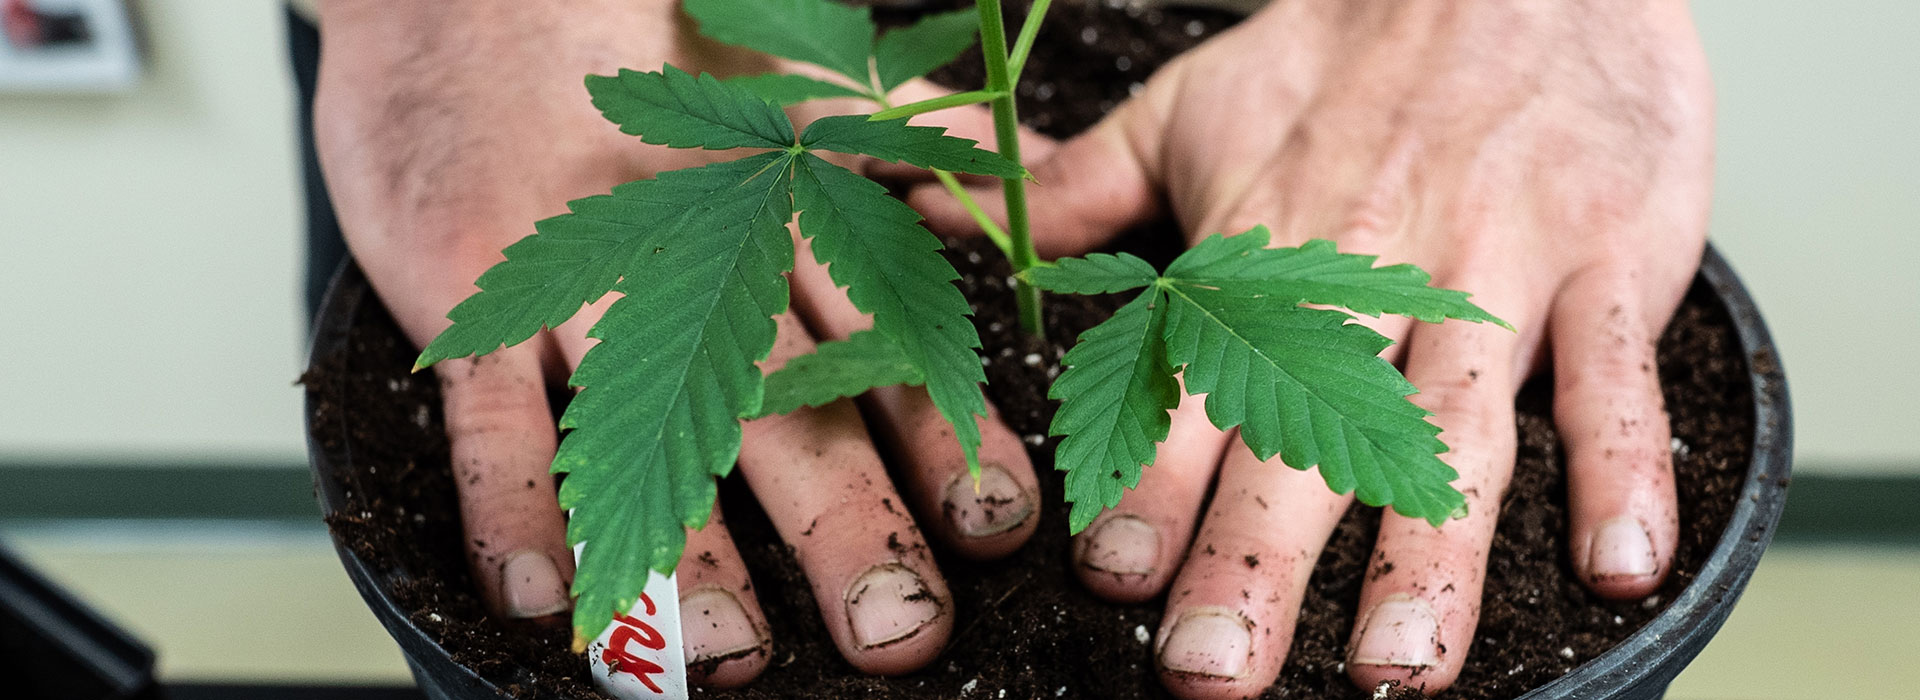 Planting cannabis, photo by Allisa Coomey